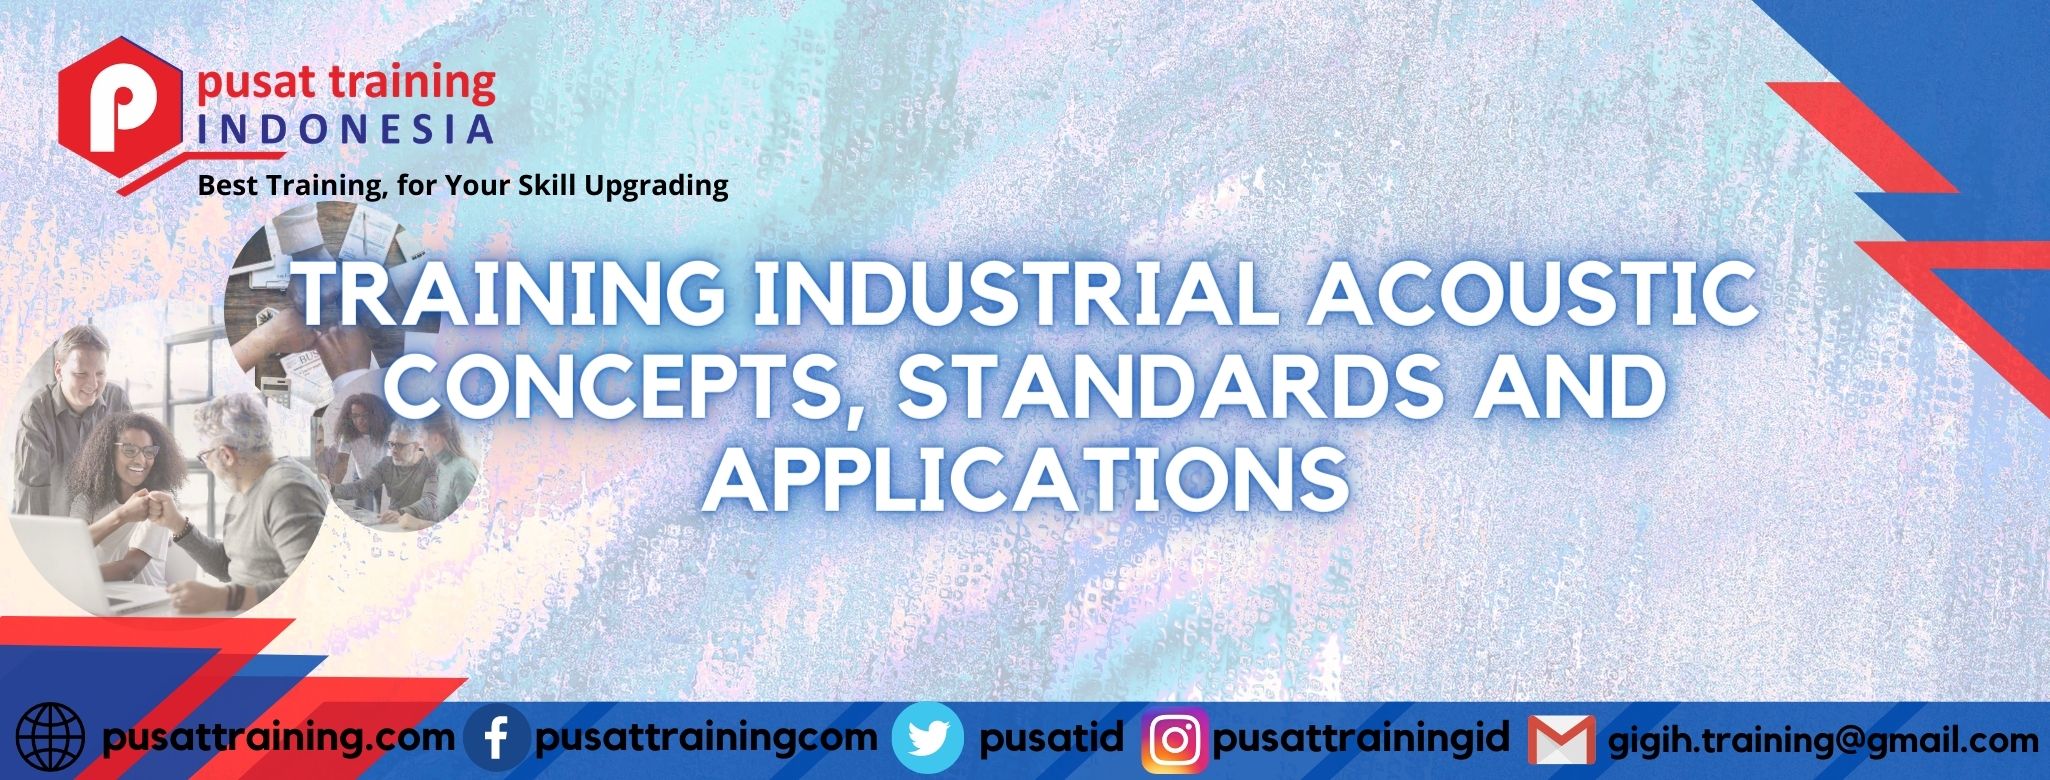 training-industrial-accoustic-concept-standars-and-application